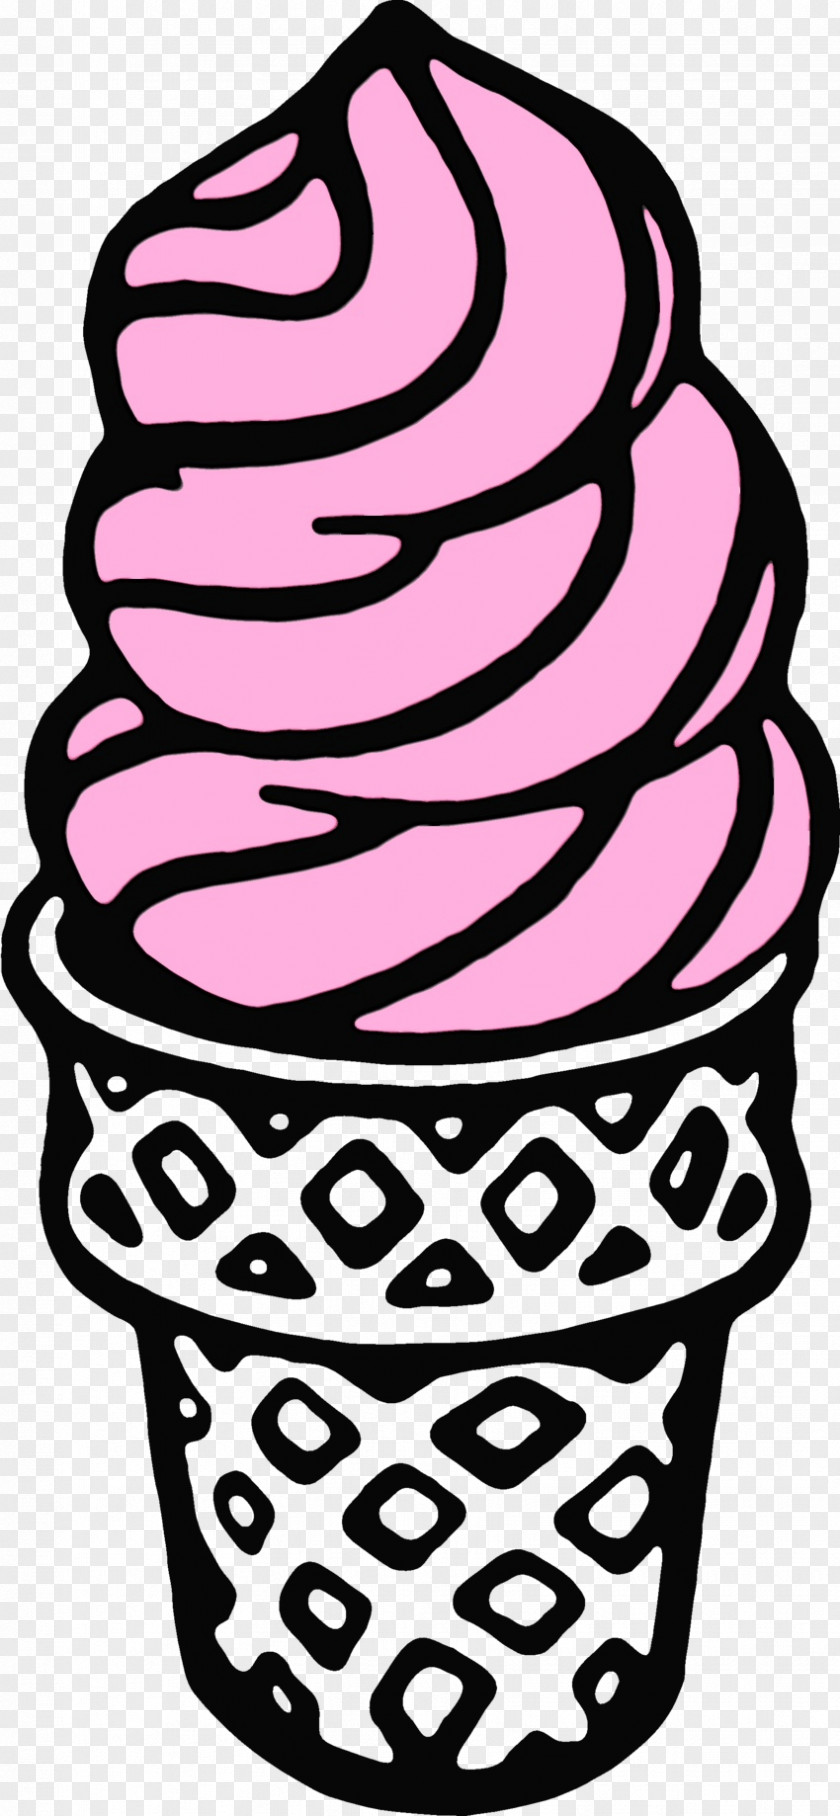 Baking Cup Ice Cream PNG